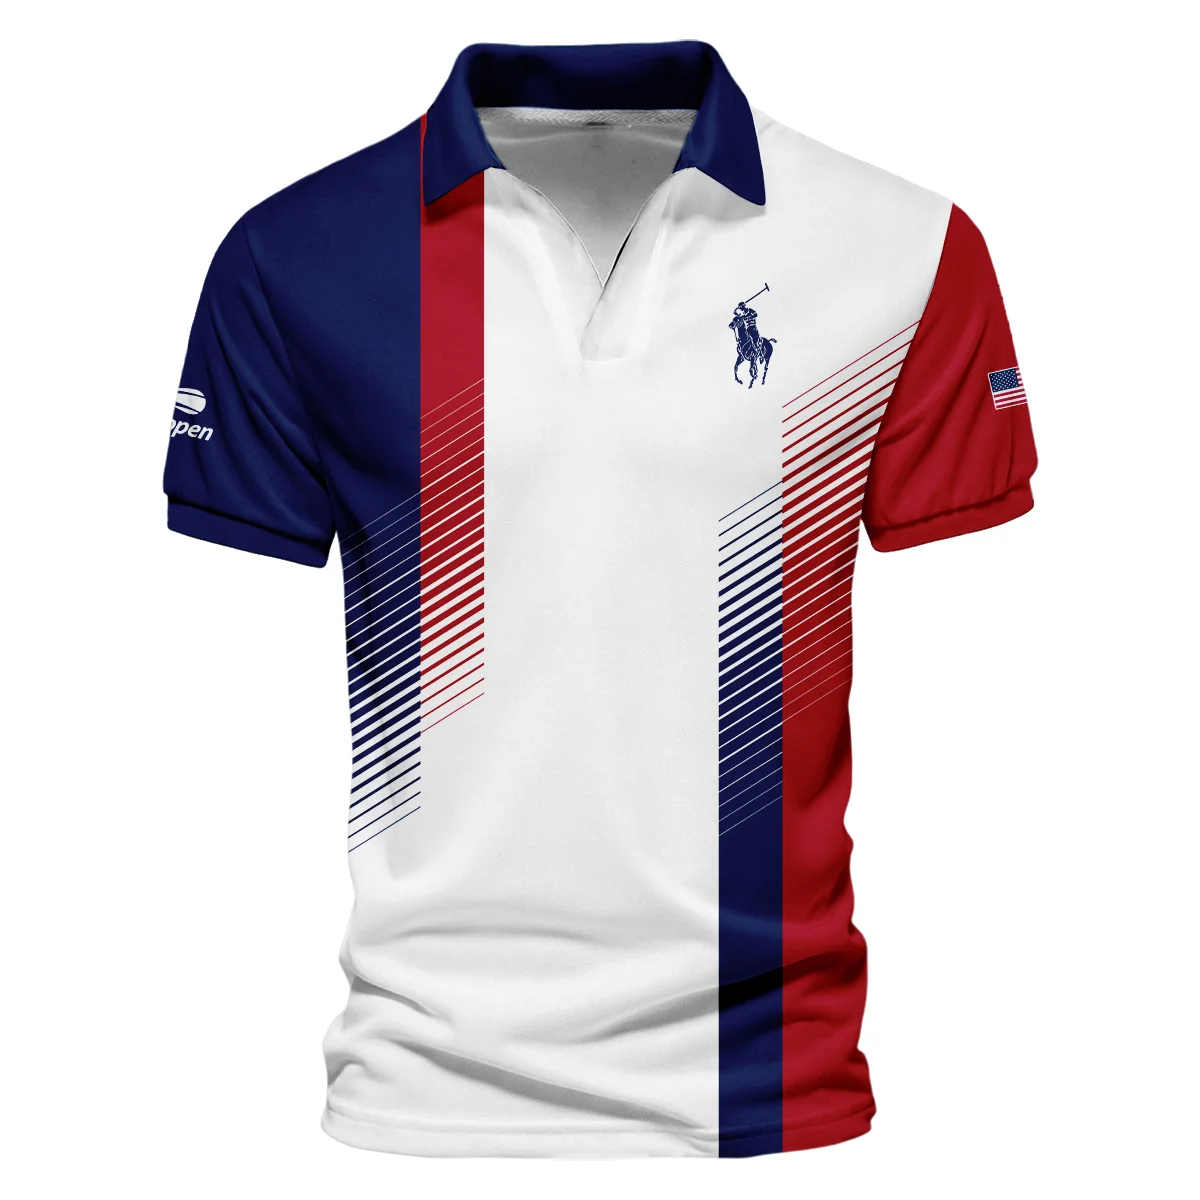 Ralph Lauren Blue Red Straight Line White US Open Tennis Champions Polo Shirt Style Classic Polo Shirt For Men